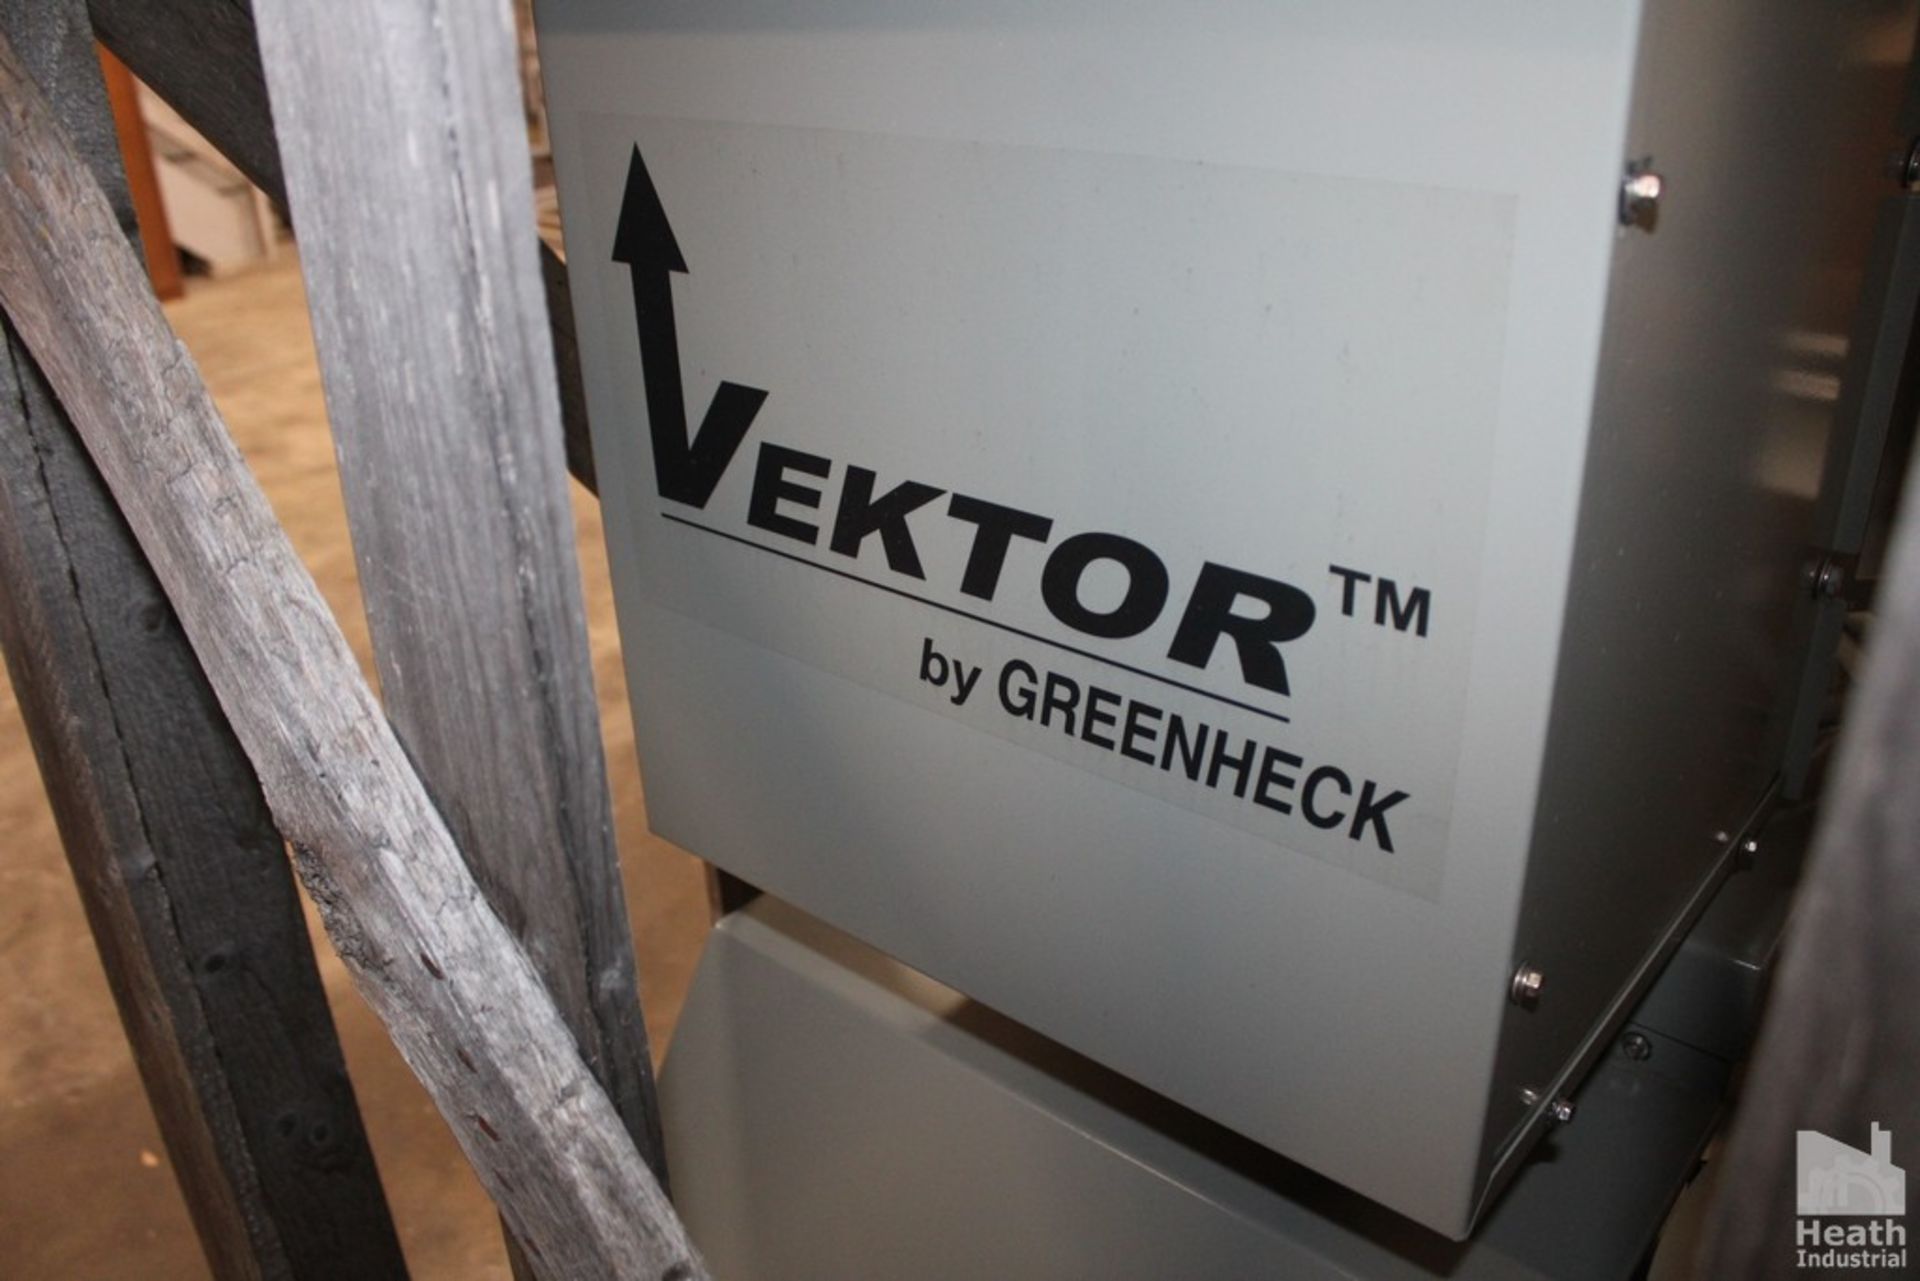 VEKTOR PX GREENHECK LABORATORY EXHAUST SYSTEM, MODEL VK-H-10-A7-X, S/N 16663247, APPEARS TO BE NEW - Image 2 of 6